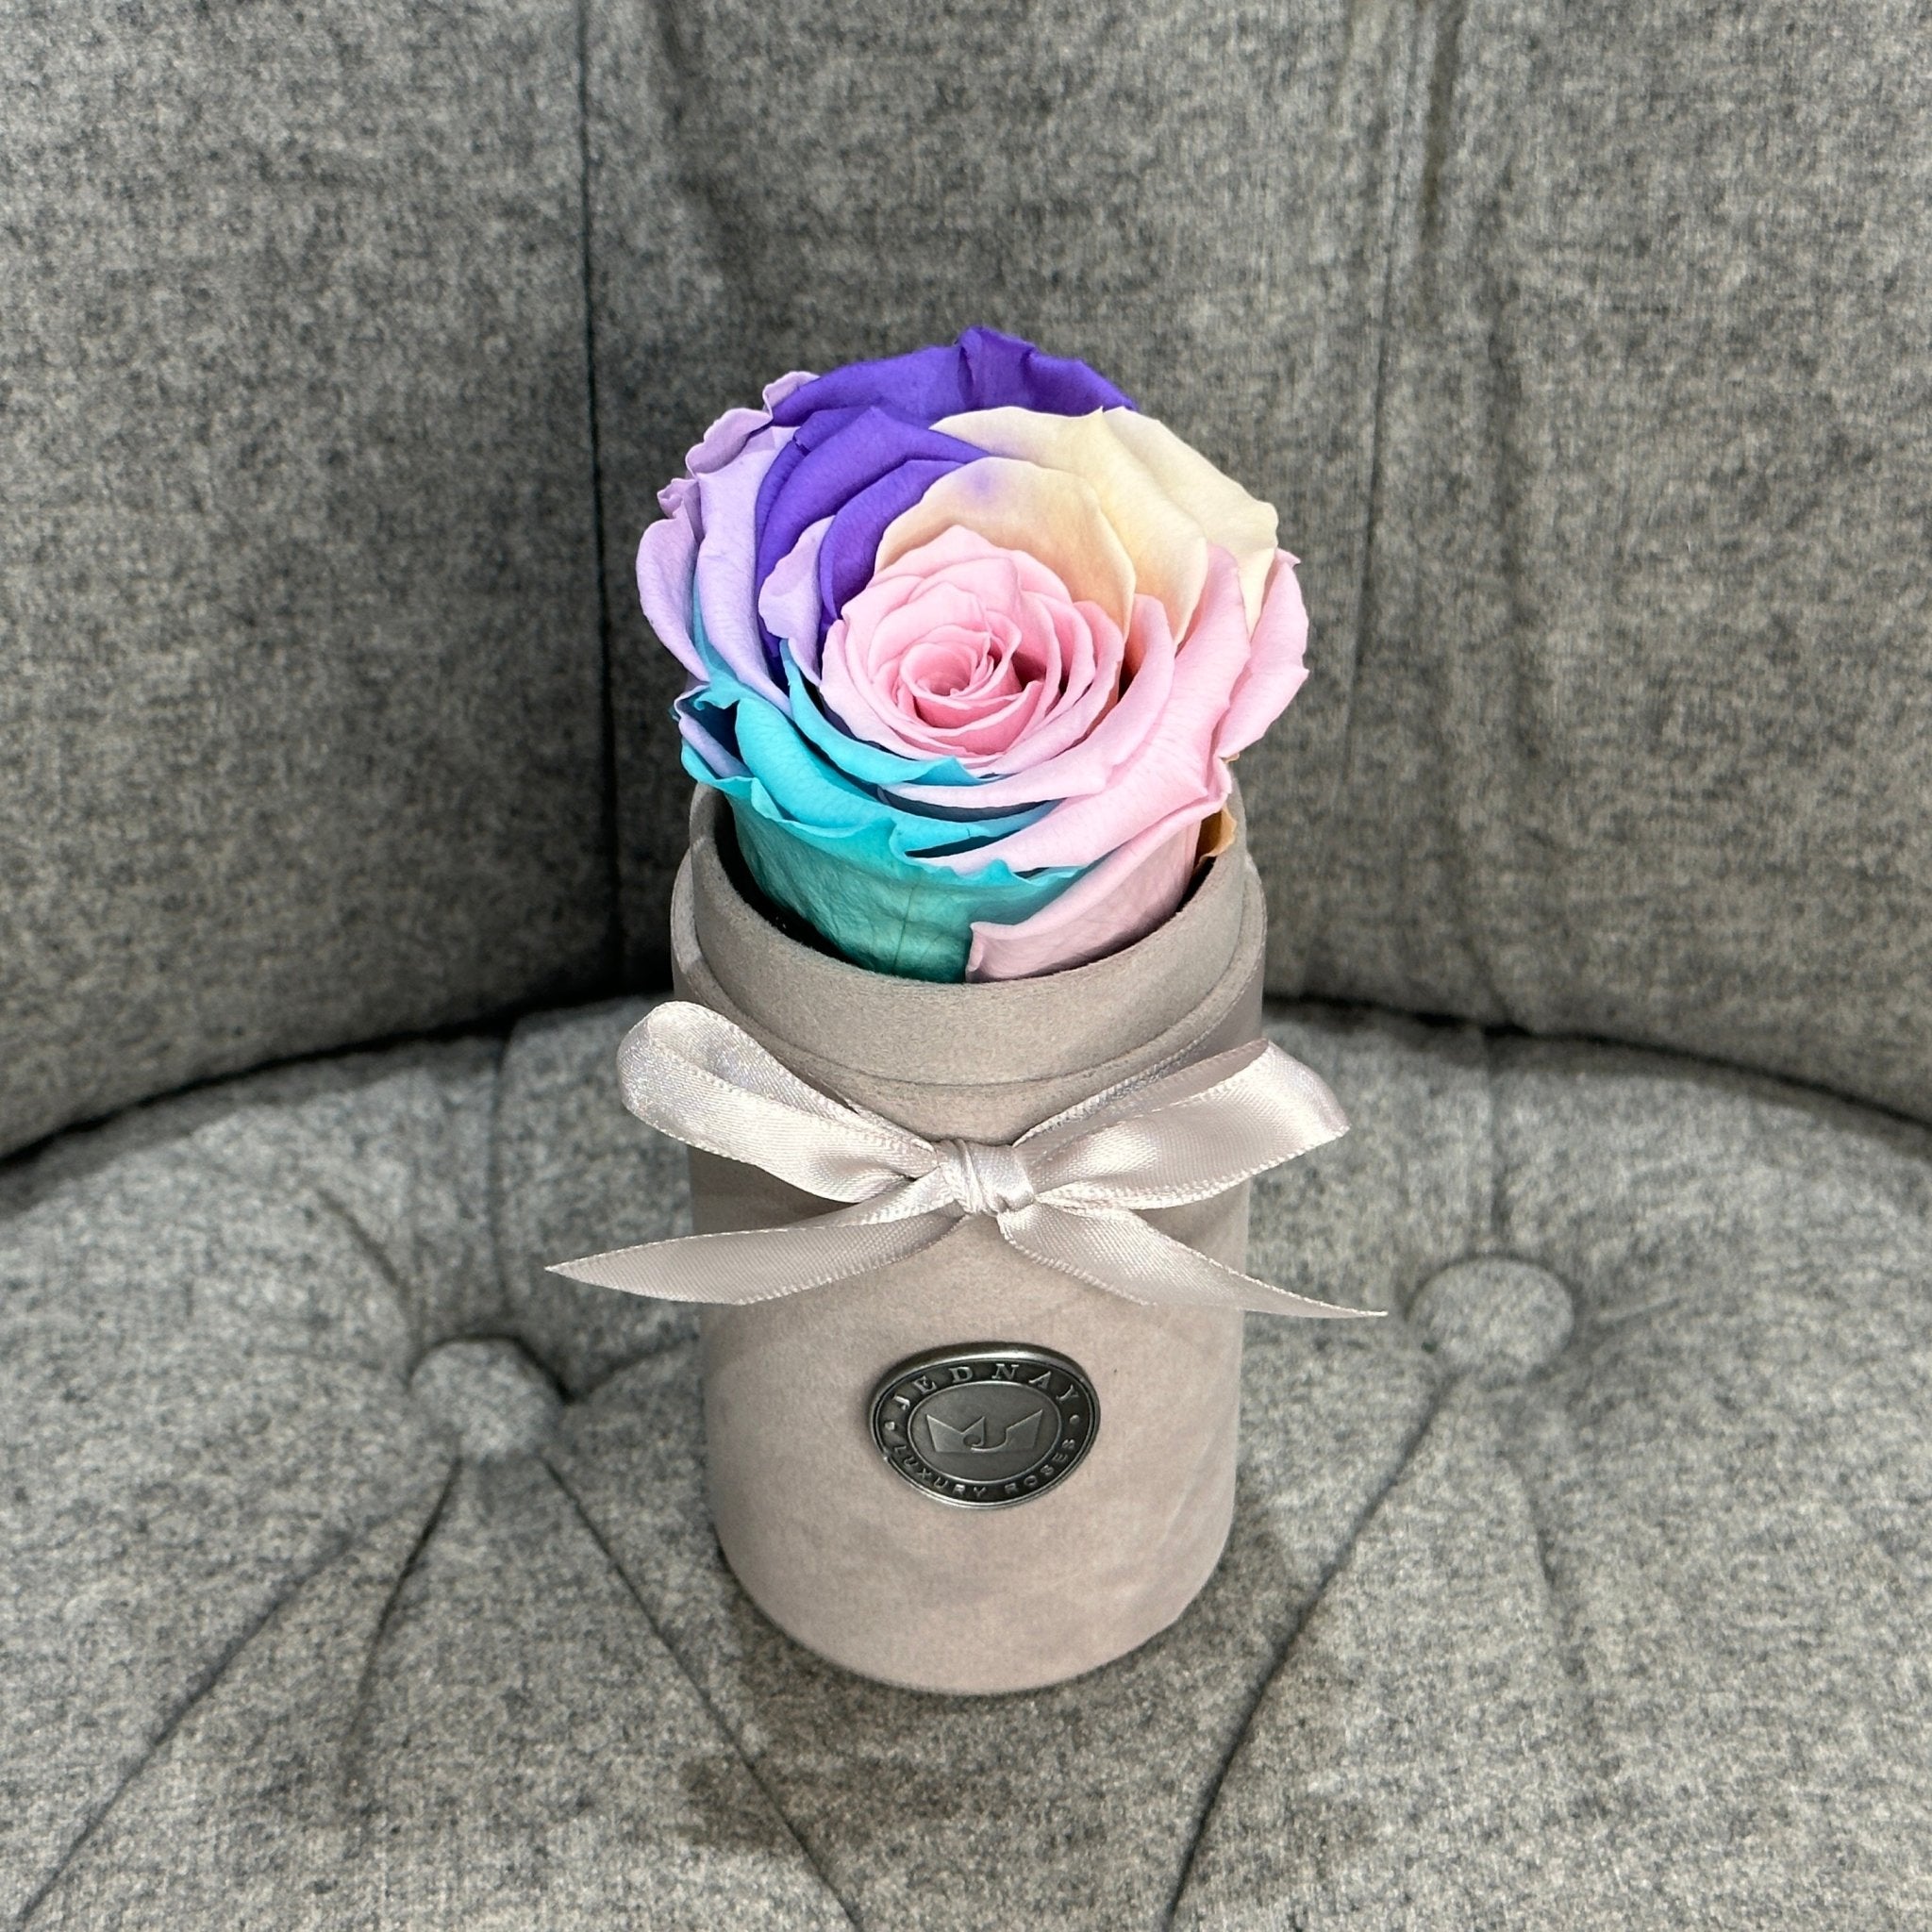 Single Grey Suede Forever Rose Box - Over The Rainbow Eternal Rose - Jednay Roses